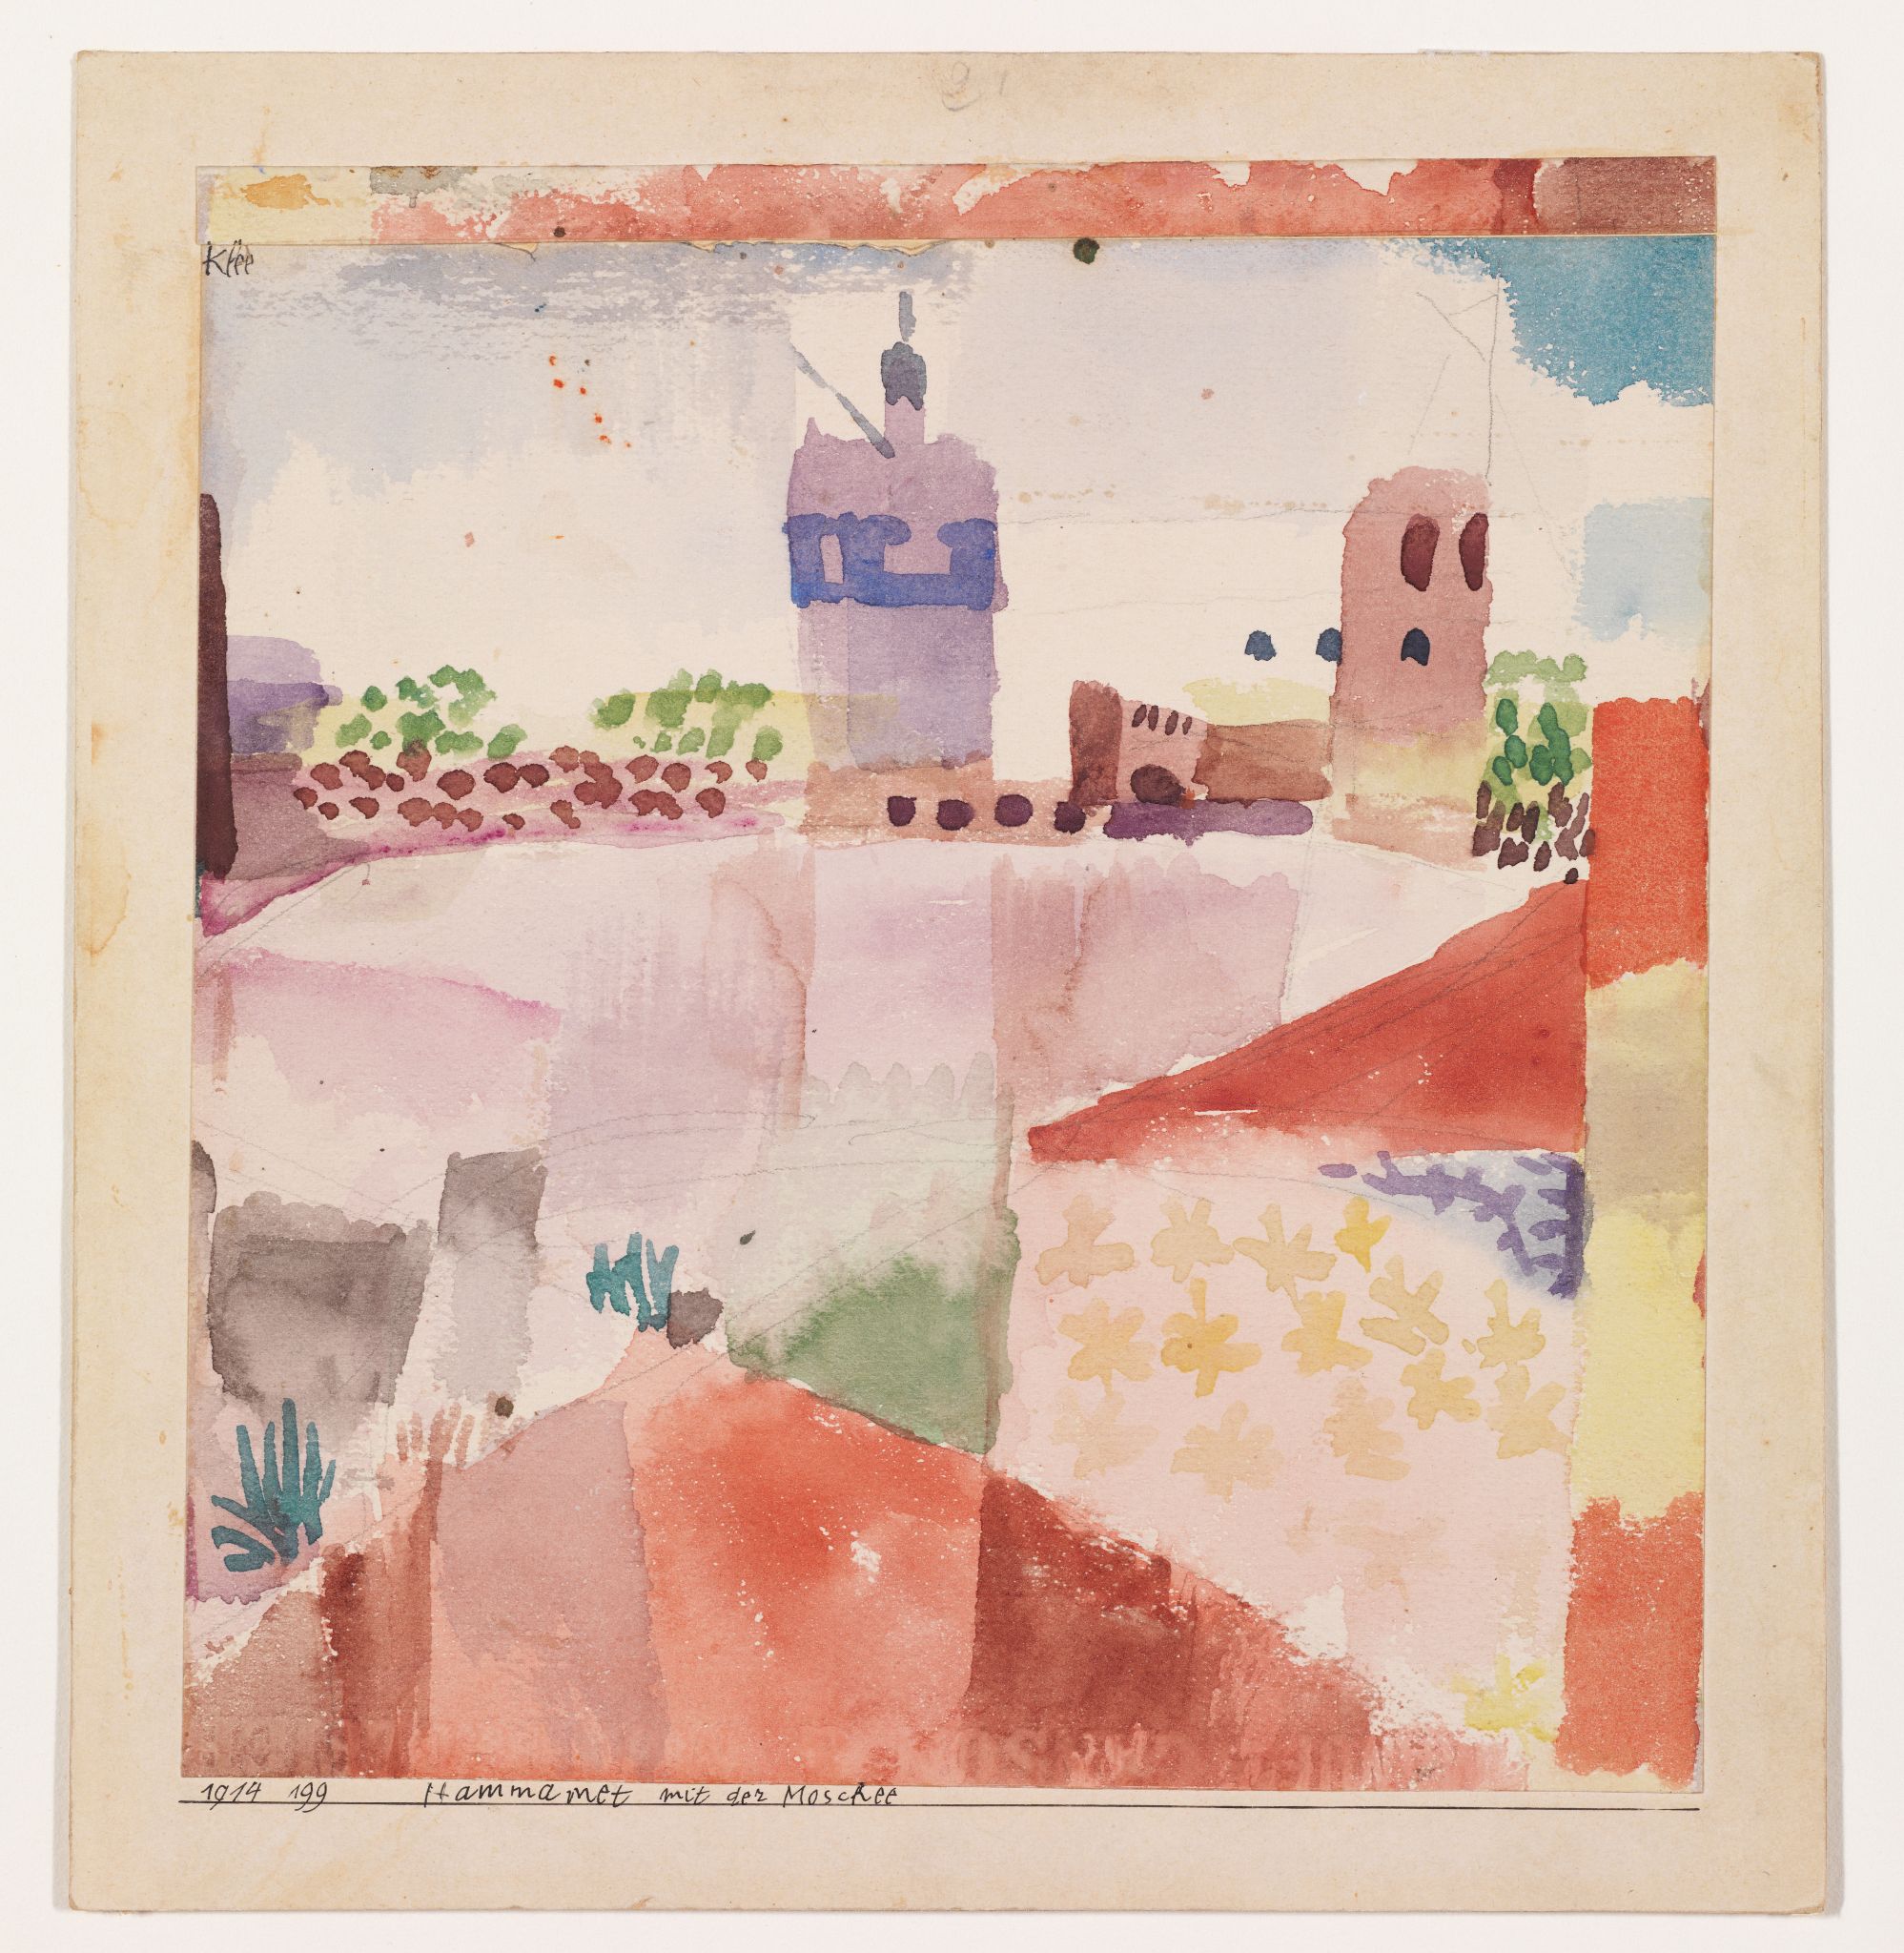 Klee's Hammamet with its Mosque, (1914) is on display at New York's Metropolitan Museum of Art (Artists Rights Society)